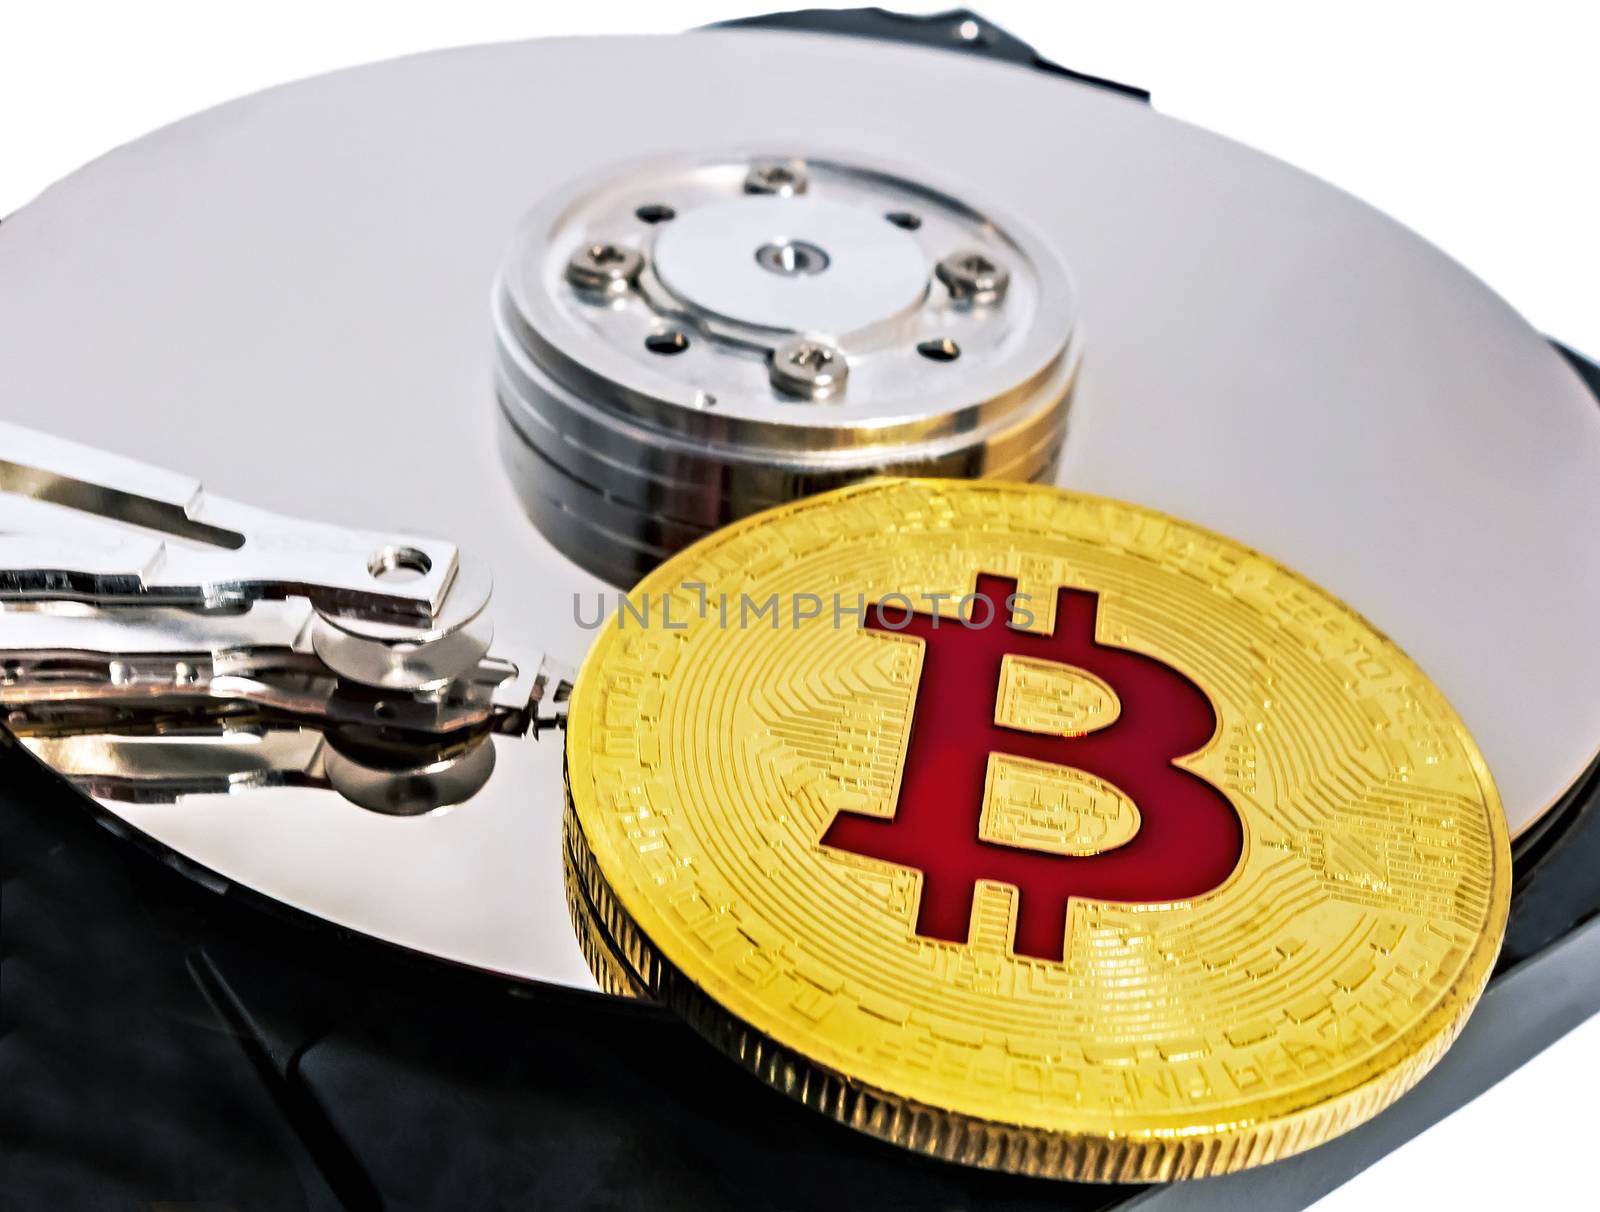 Physical Coin Cryptocurrency BTC Gold Plated Bitcoin in laptop hard disk server wallet. Crypto currency blockchain Coin virtual money concept isolated on white background.